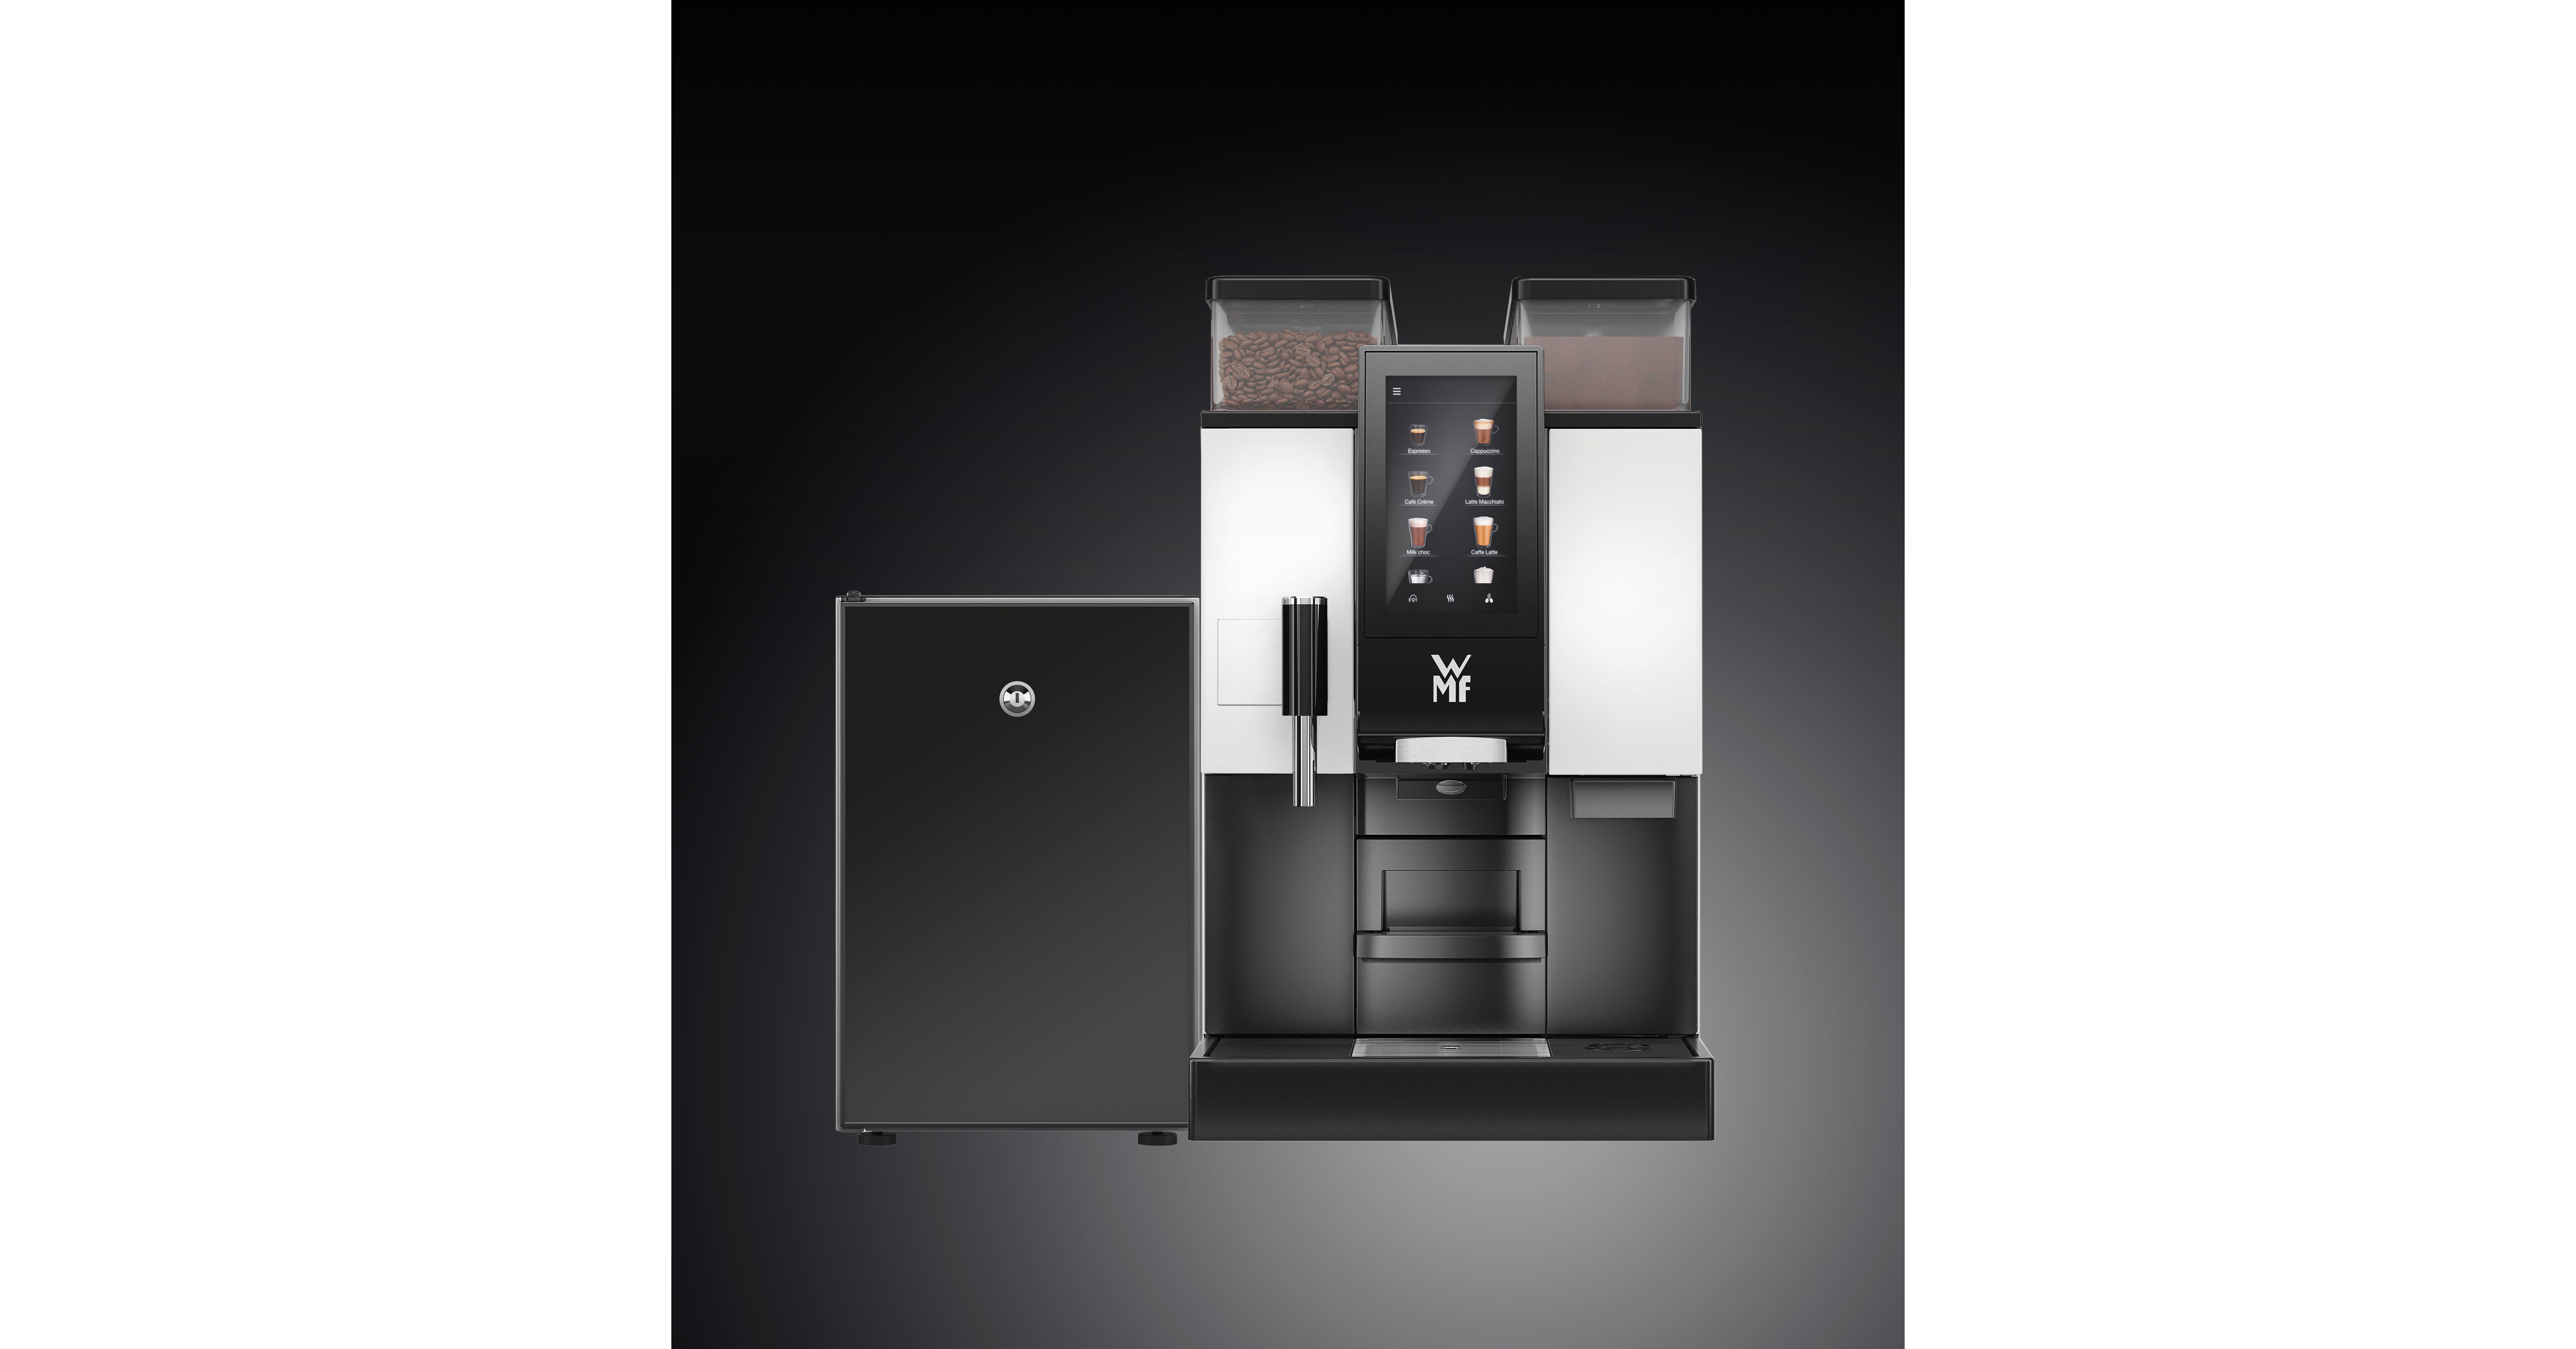 WMF Fully Automatic Coffee Machines